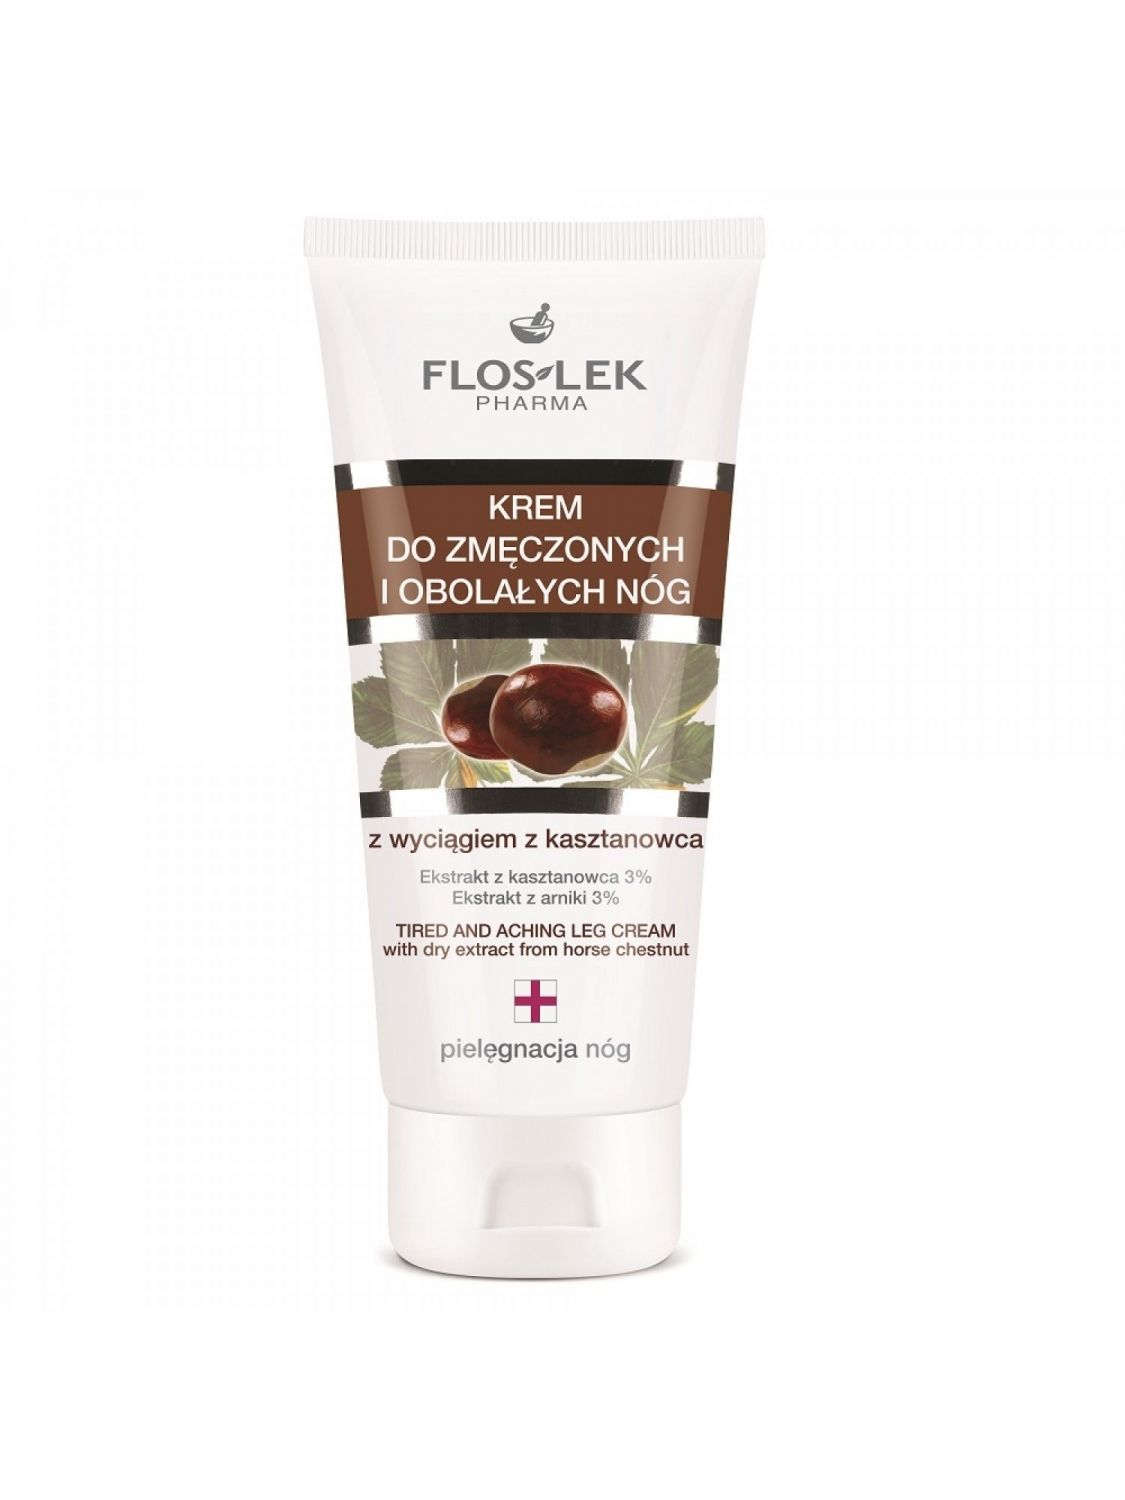 Floslek Cream for tired and achy legs with horse chestnut extract